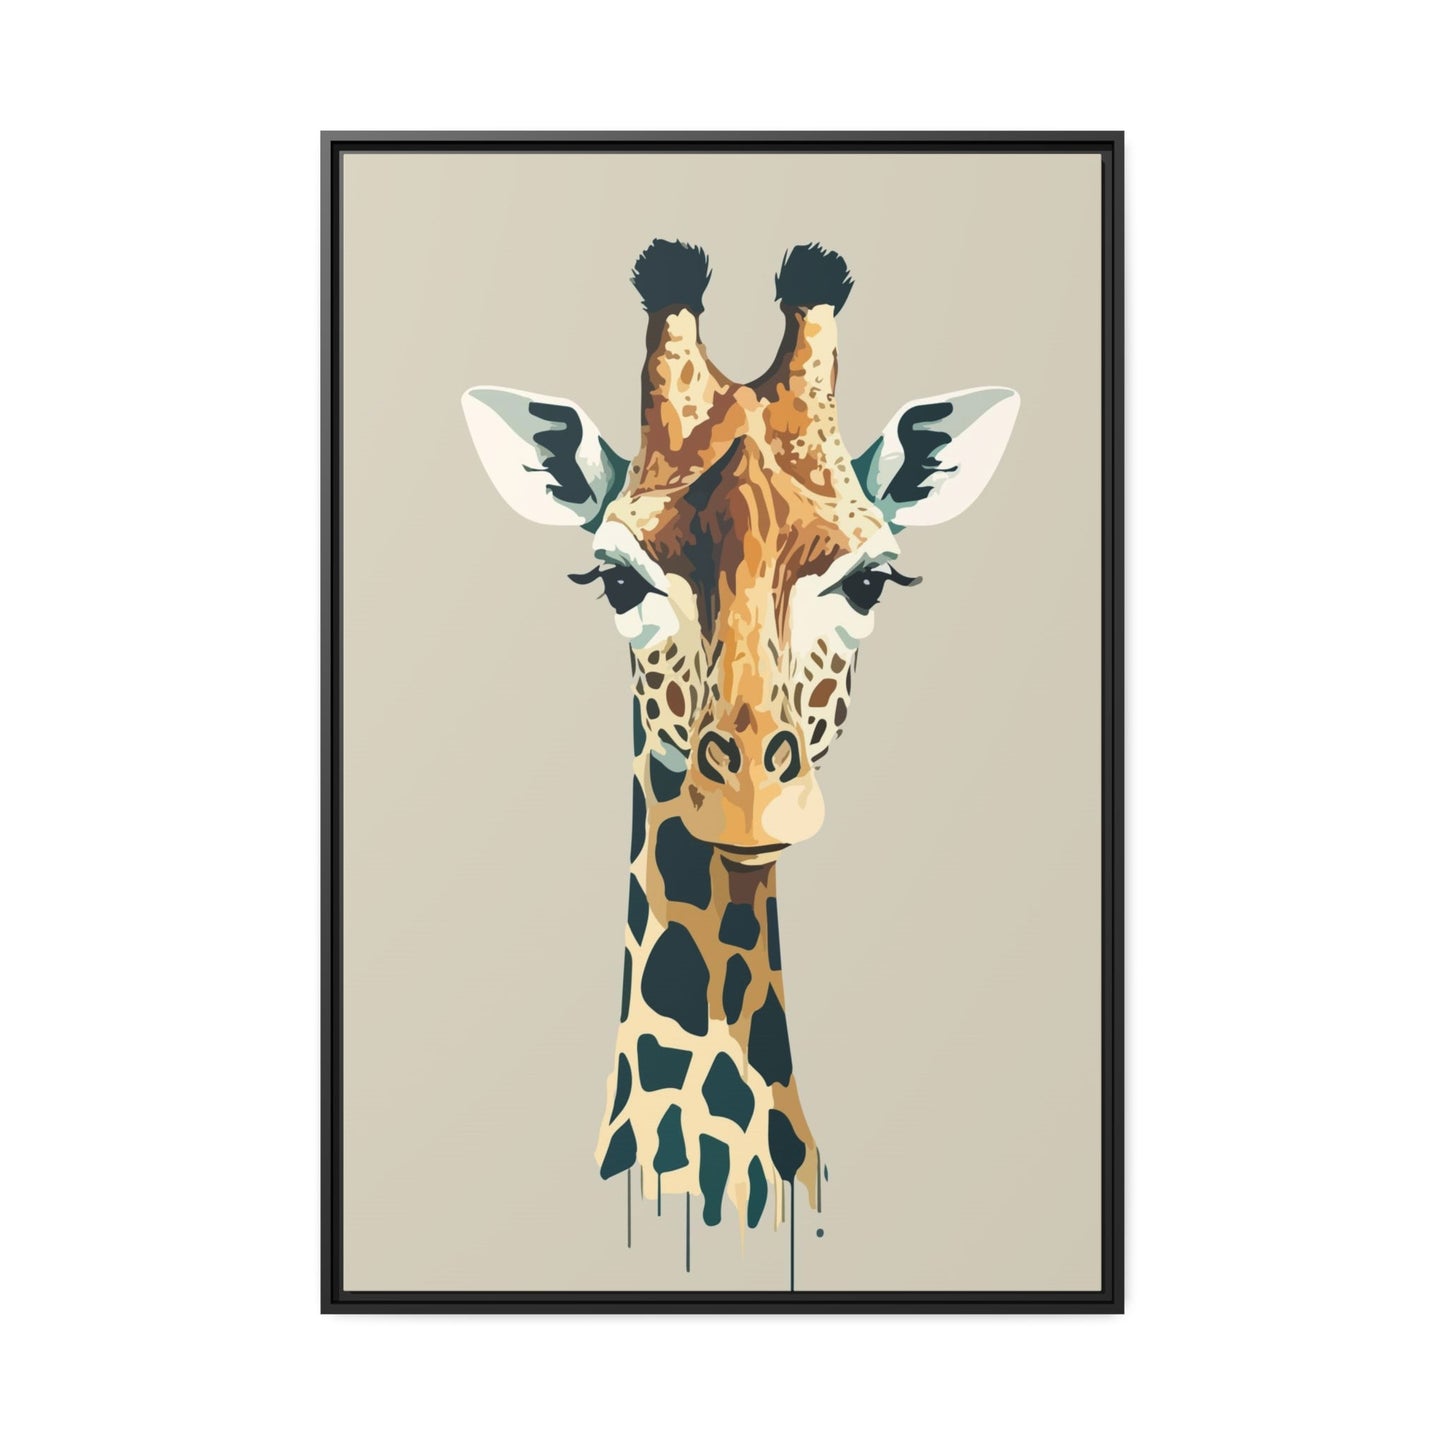 Graceful Giraffe: A Beautifully Rendered Artwork on Canvas & Poster